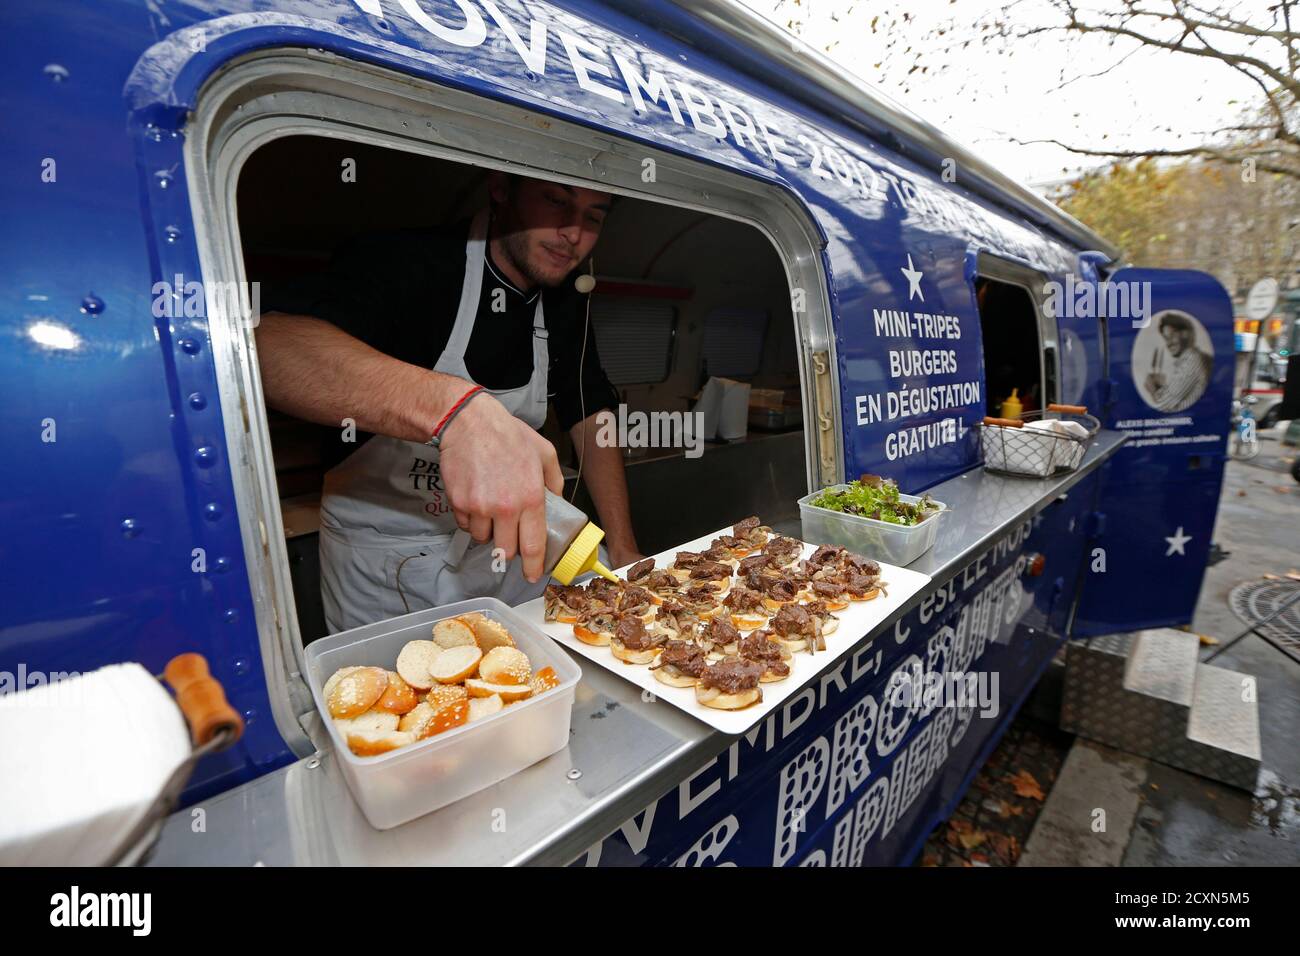 Chef Alexis Braconnier prepares small tripes burger in a food truck in  Paris October 13, 2012. Chef Alexis Braconnier has cooked during one week  to promote tripes products. This is part of